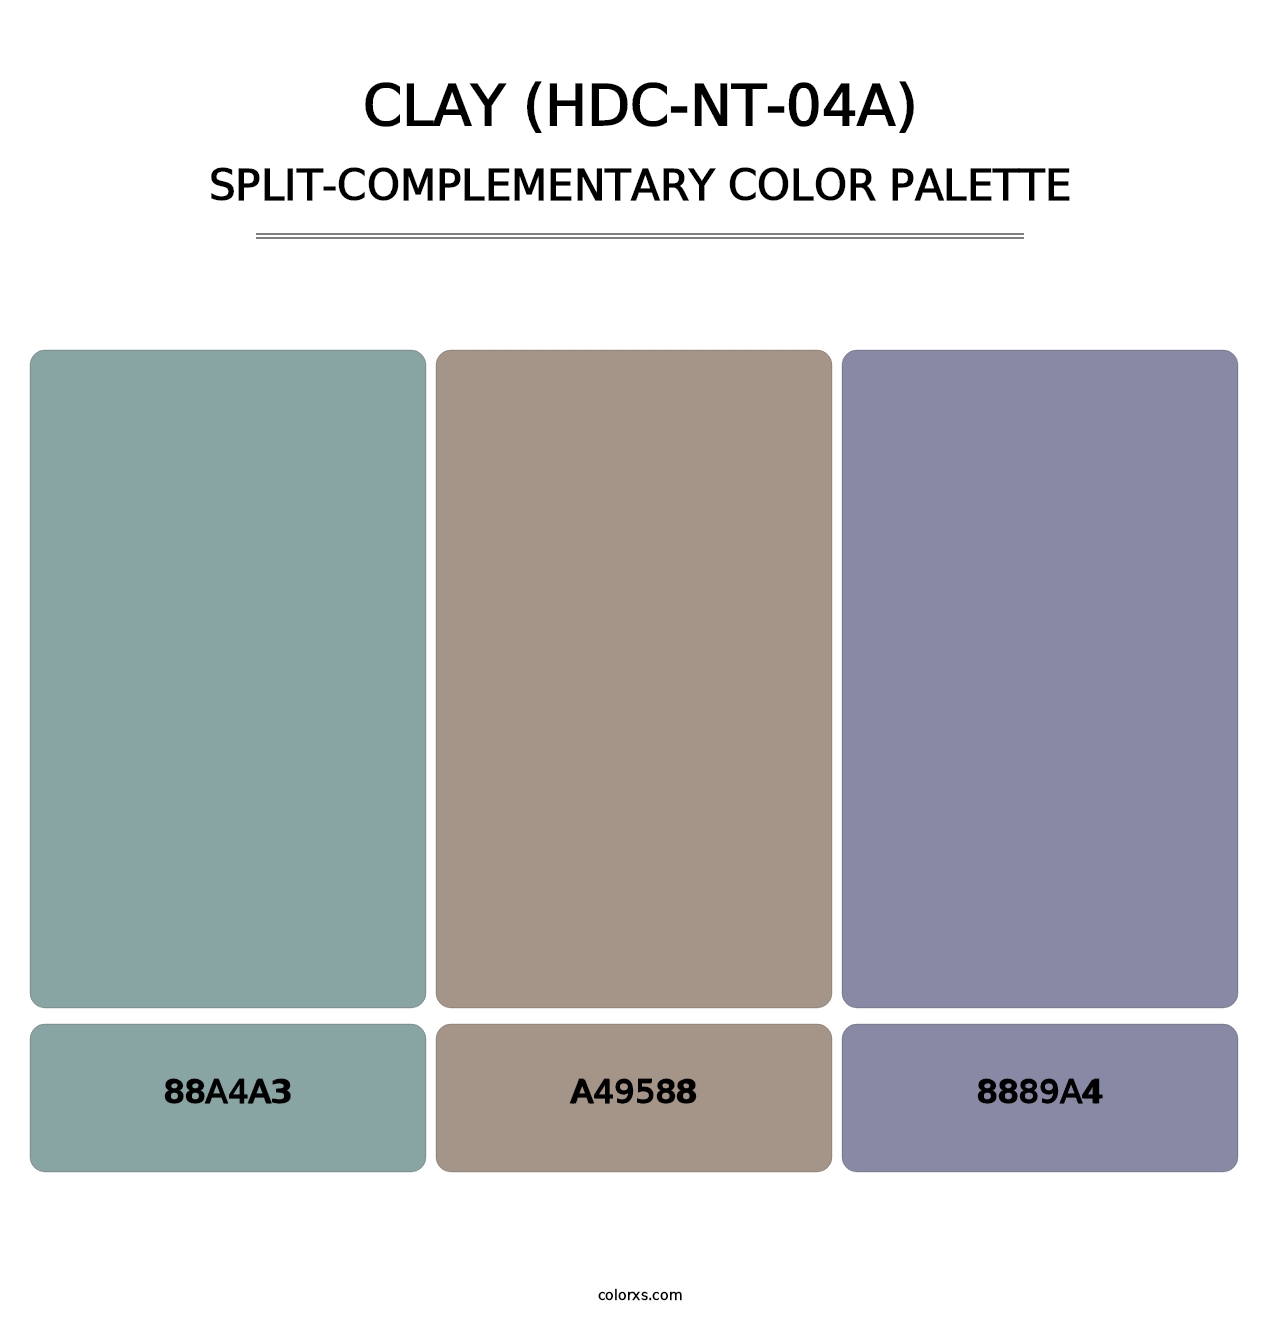 Clay (HDC-NT-04A) - Split-Complementary Color Palette